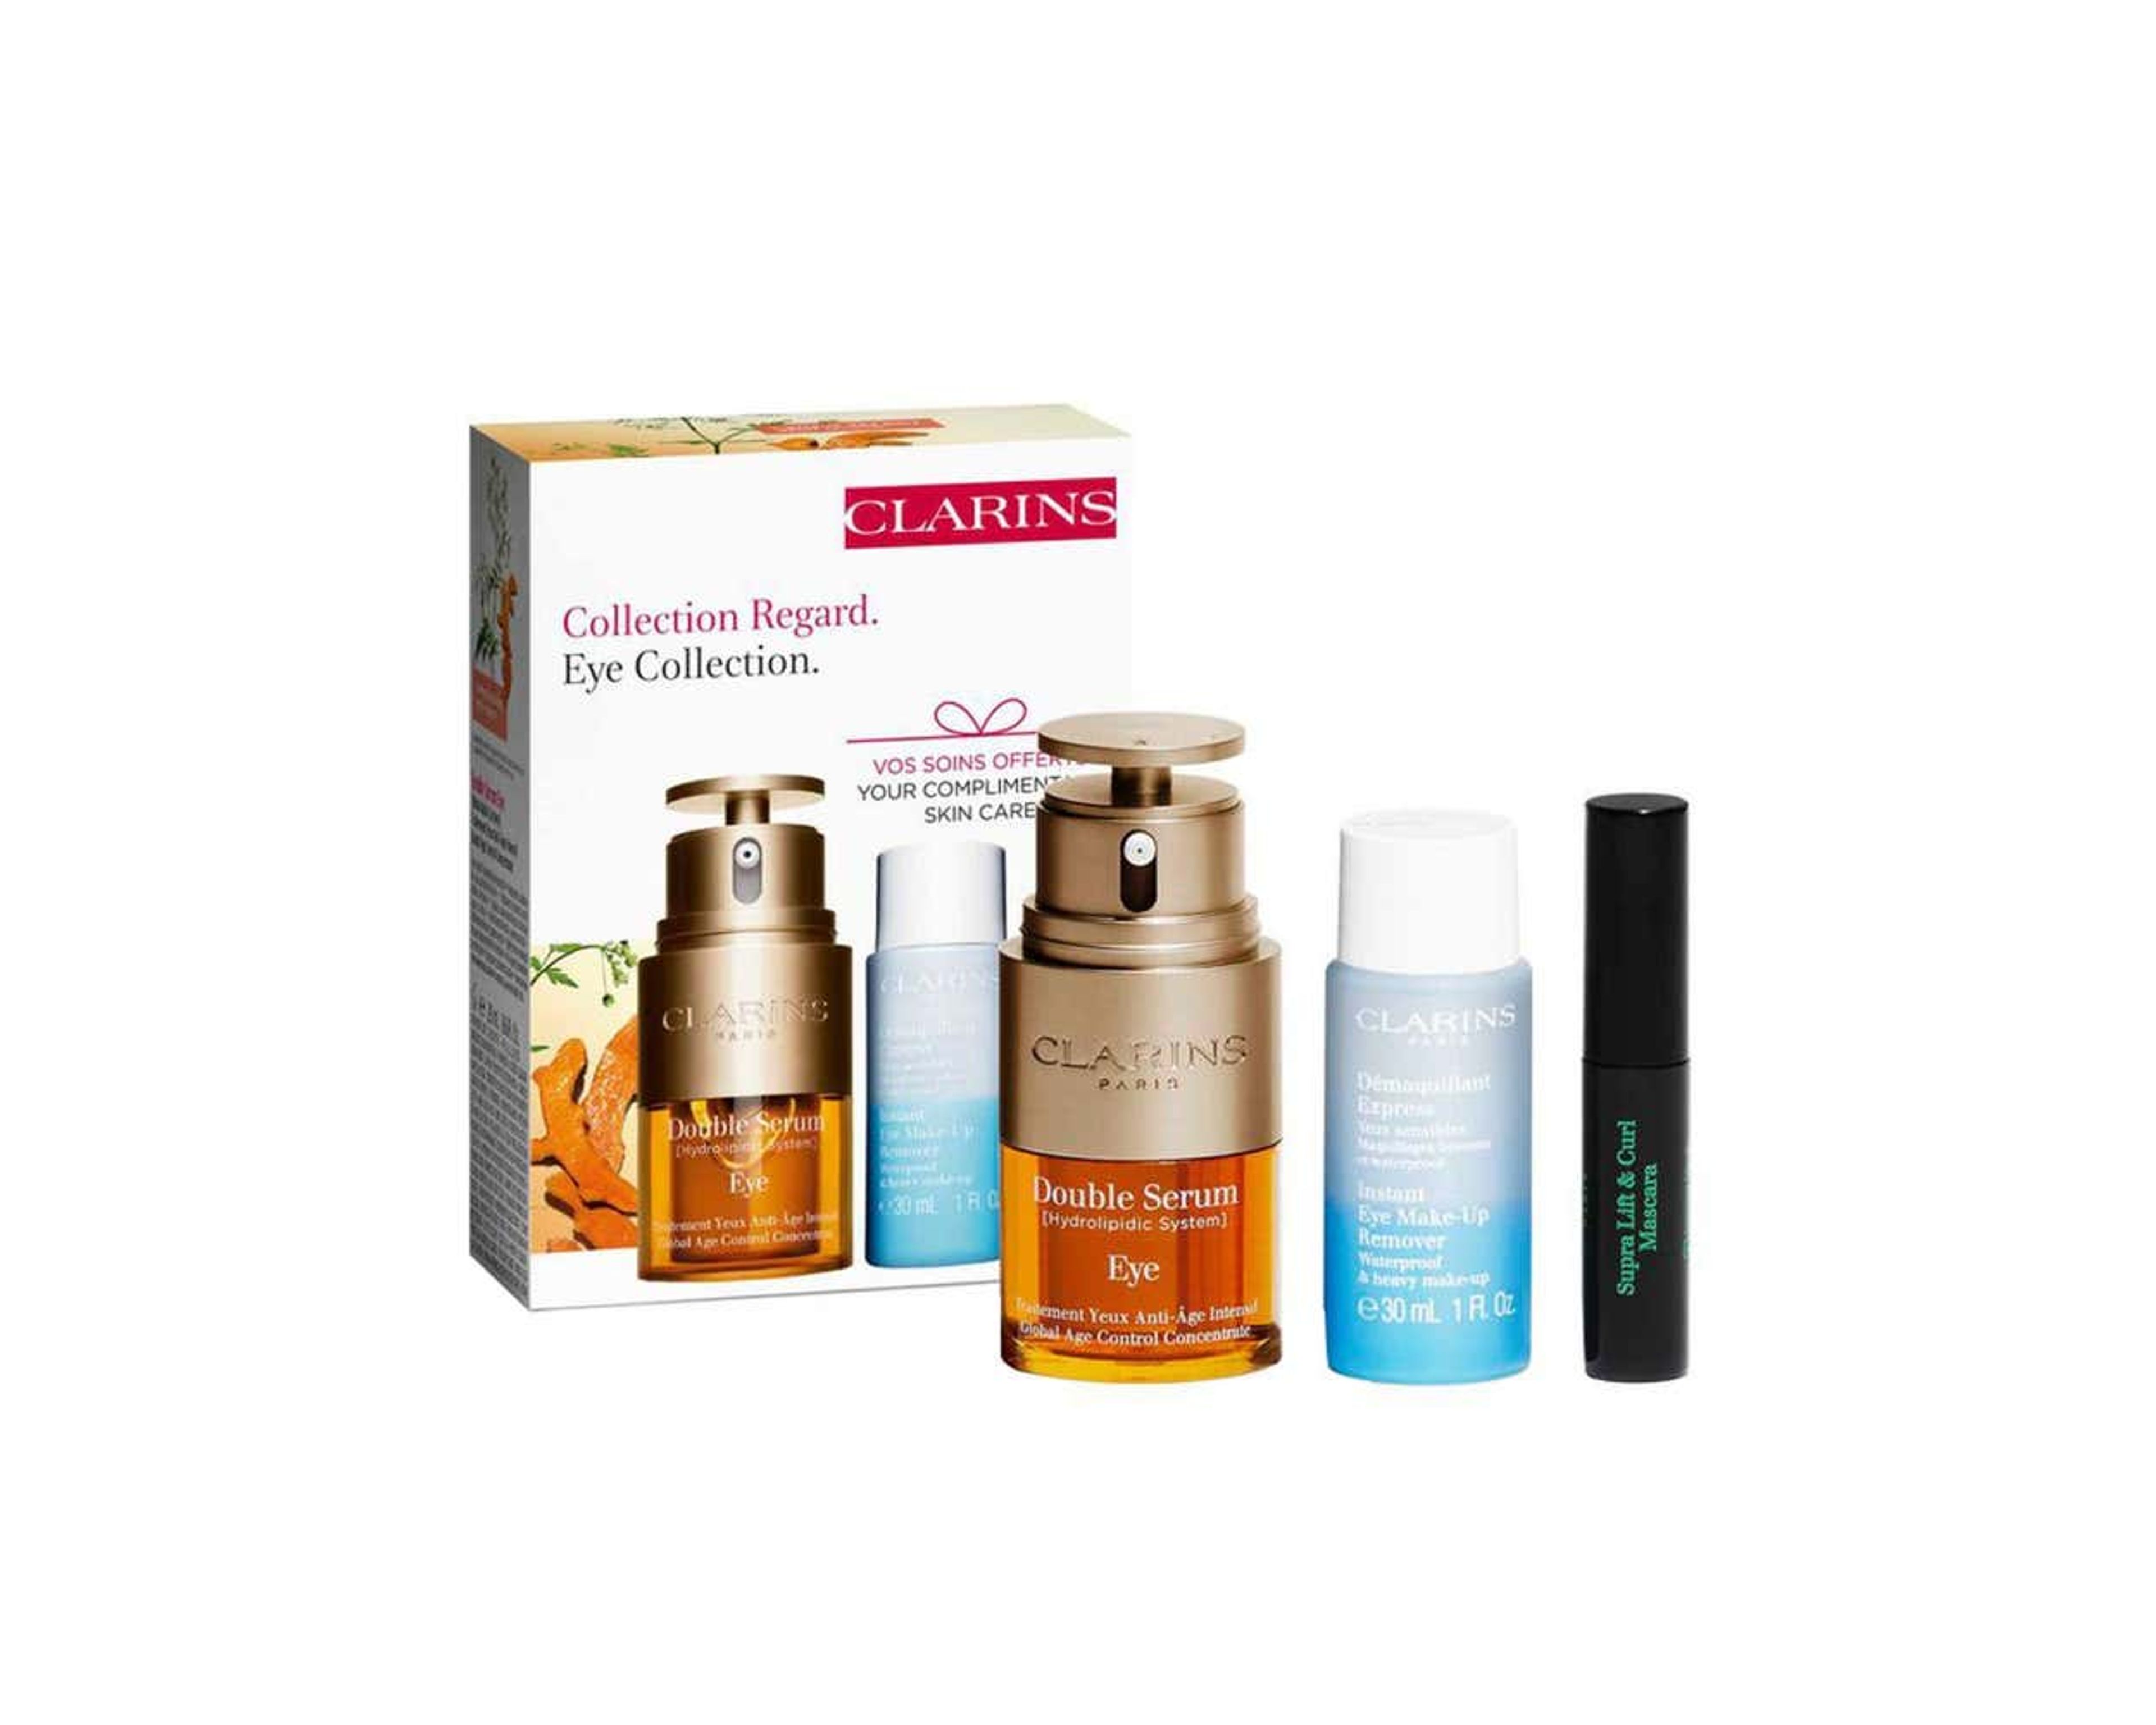 Clarins Value Pack Loyalty Double Serum Eye Cross 1